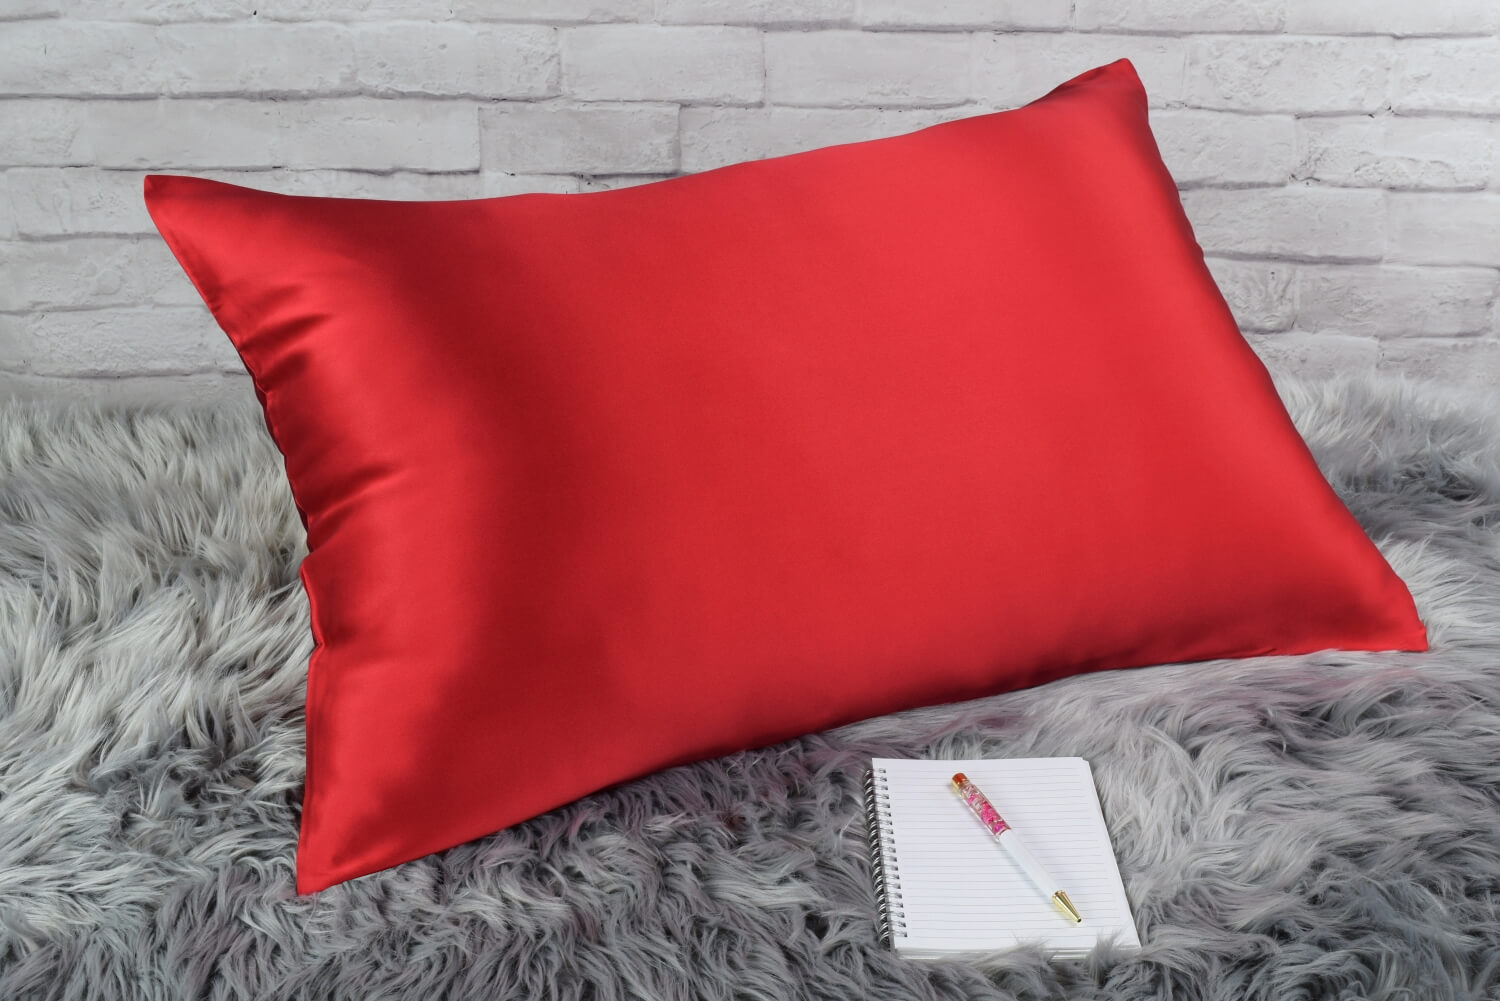 Celestial Silk Bright Red 25 momme Silk Pillowcase on rug with notebook and pretty pen